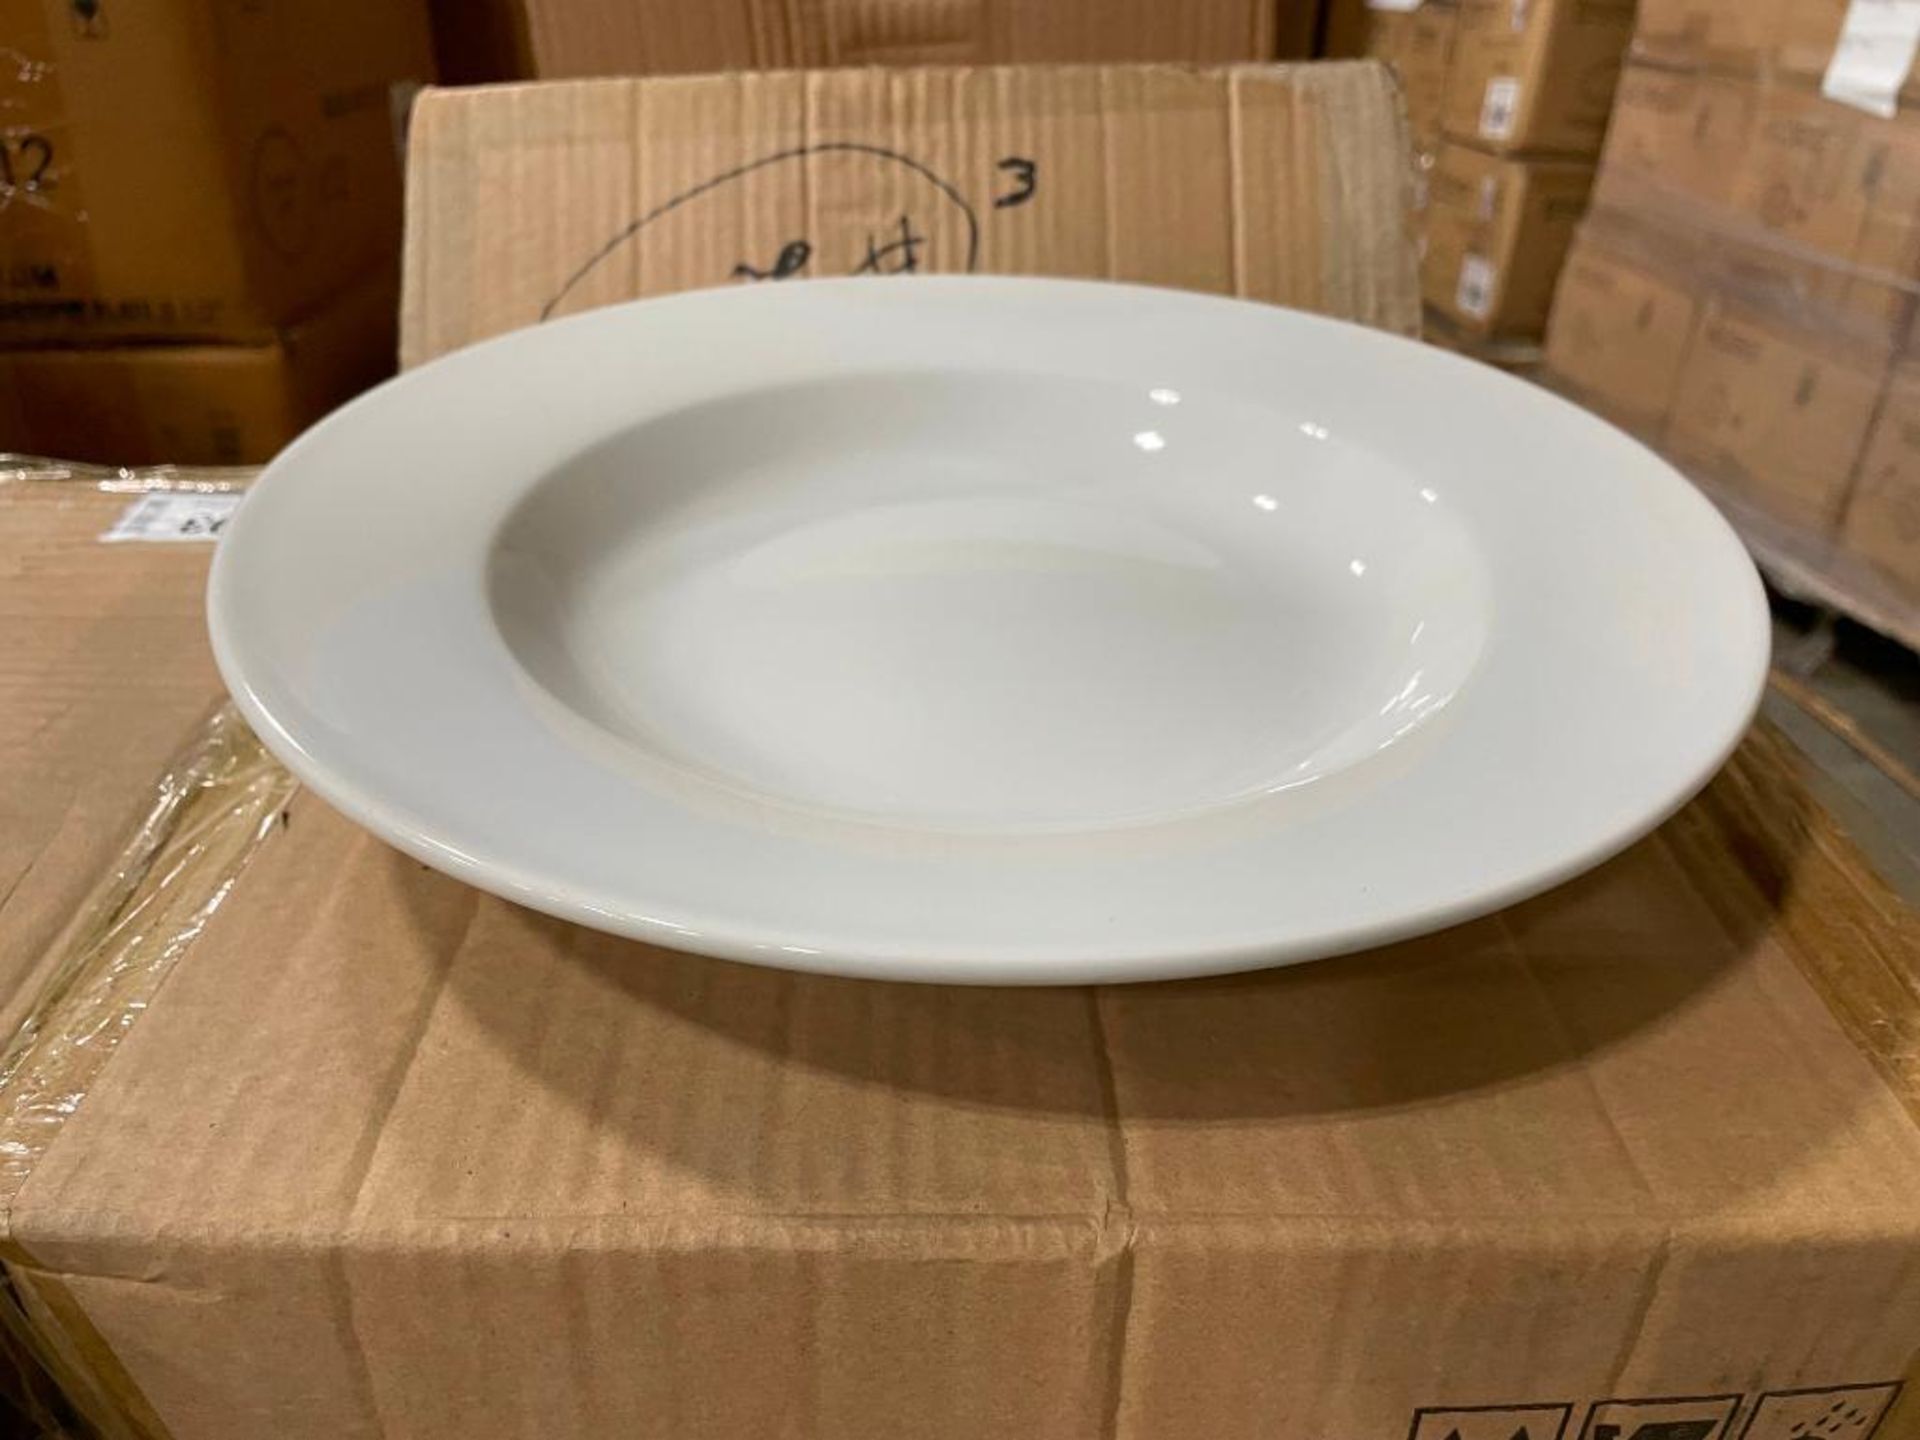 3 CASES OF 11 5/8" RIMMED PASTA / SOUP DISHES, JOHNSON ROSE 90009, CASE OF 12 - NEW - Image 3 of 5